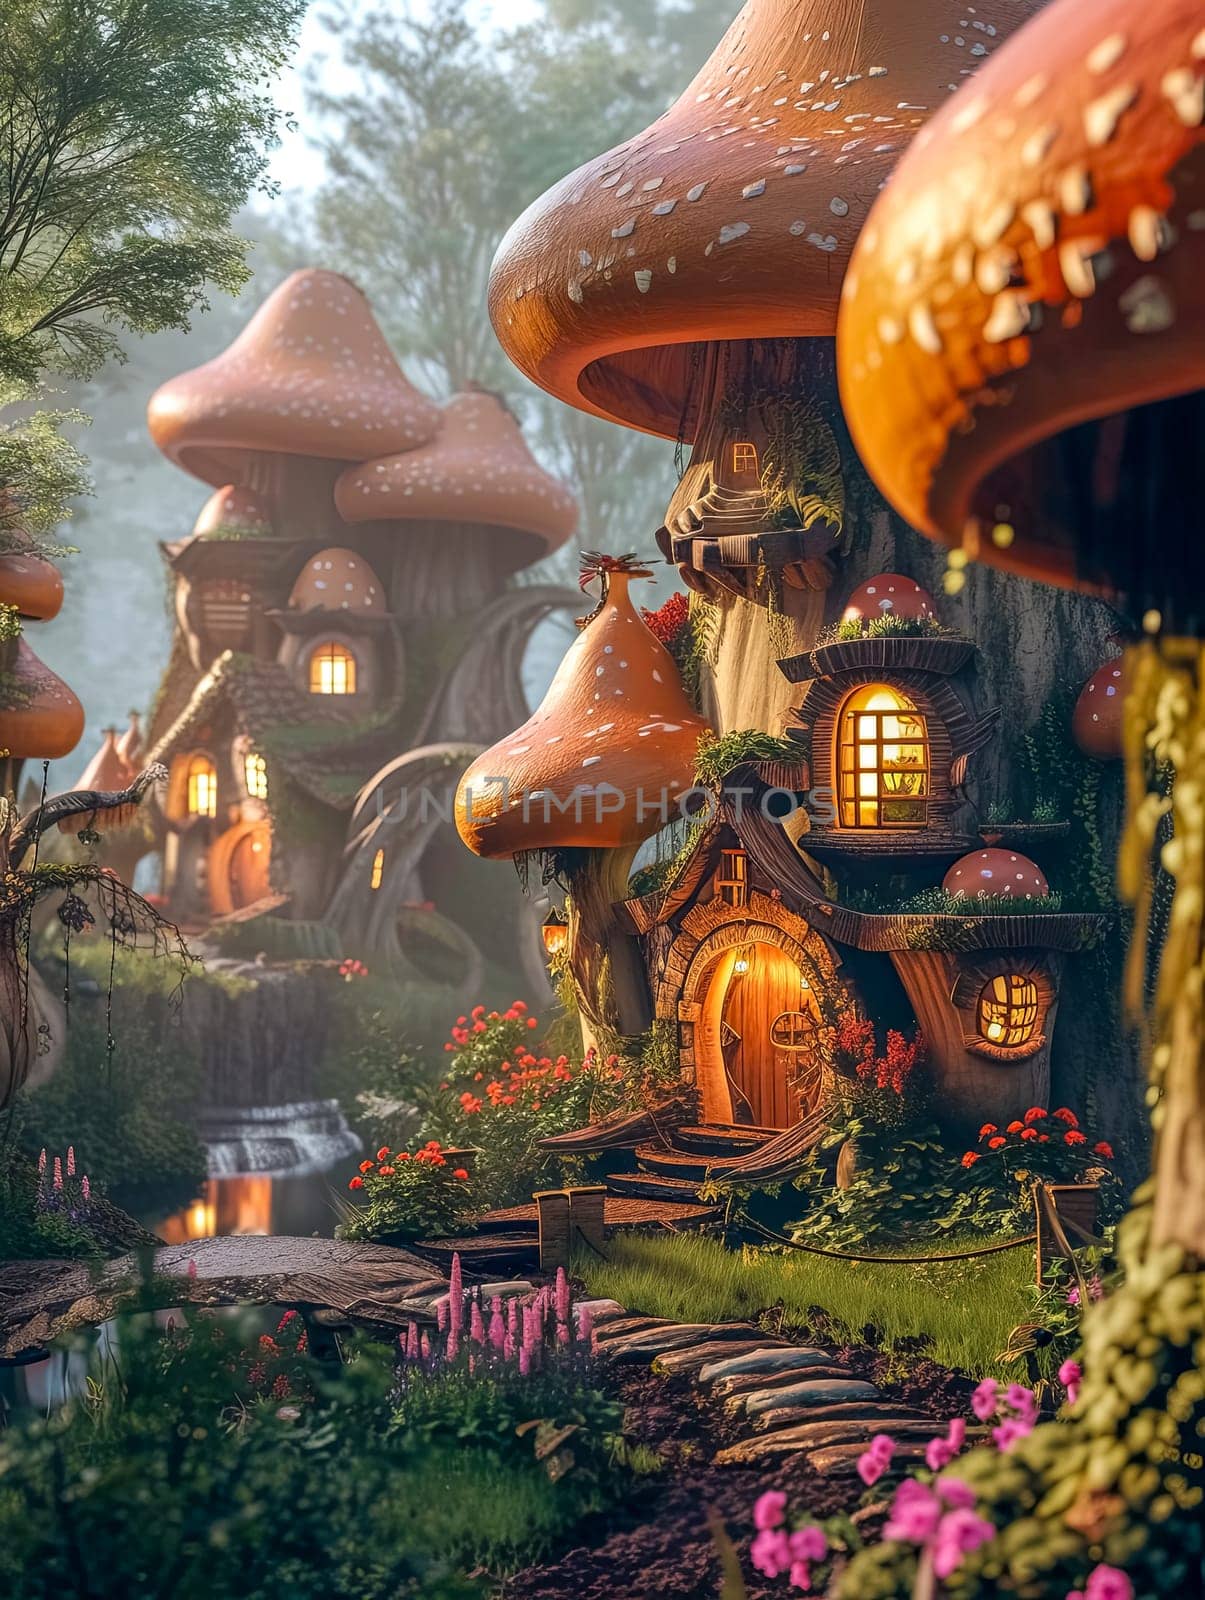 Whimsical Mushroom Houses in Enchanted Fairytale Forest Village by Edophoto